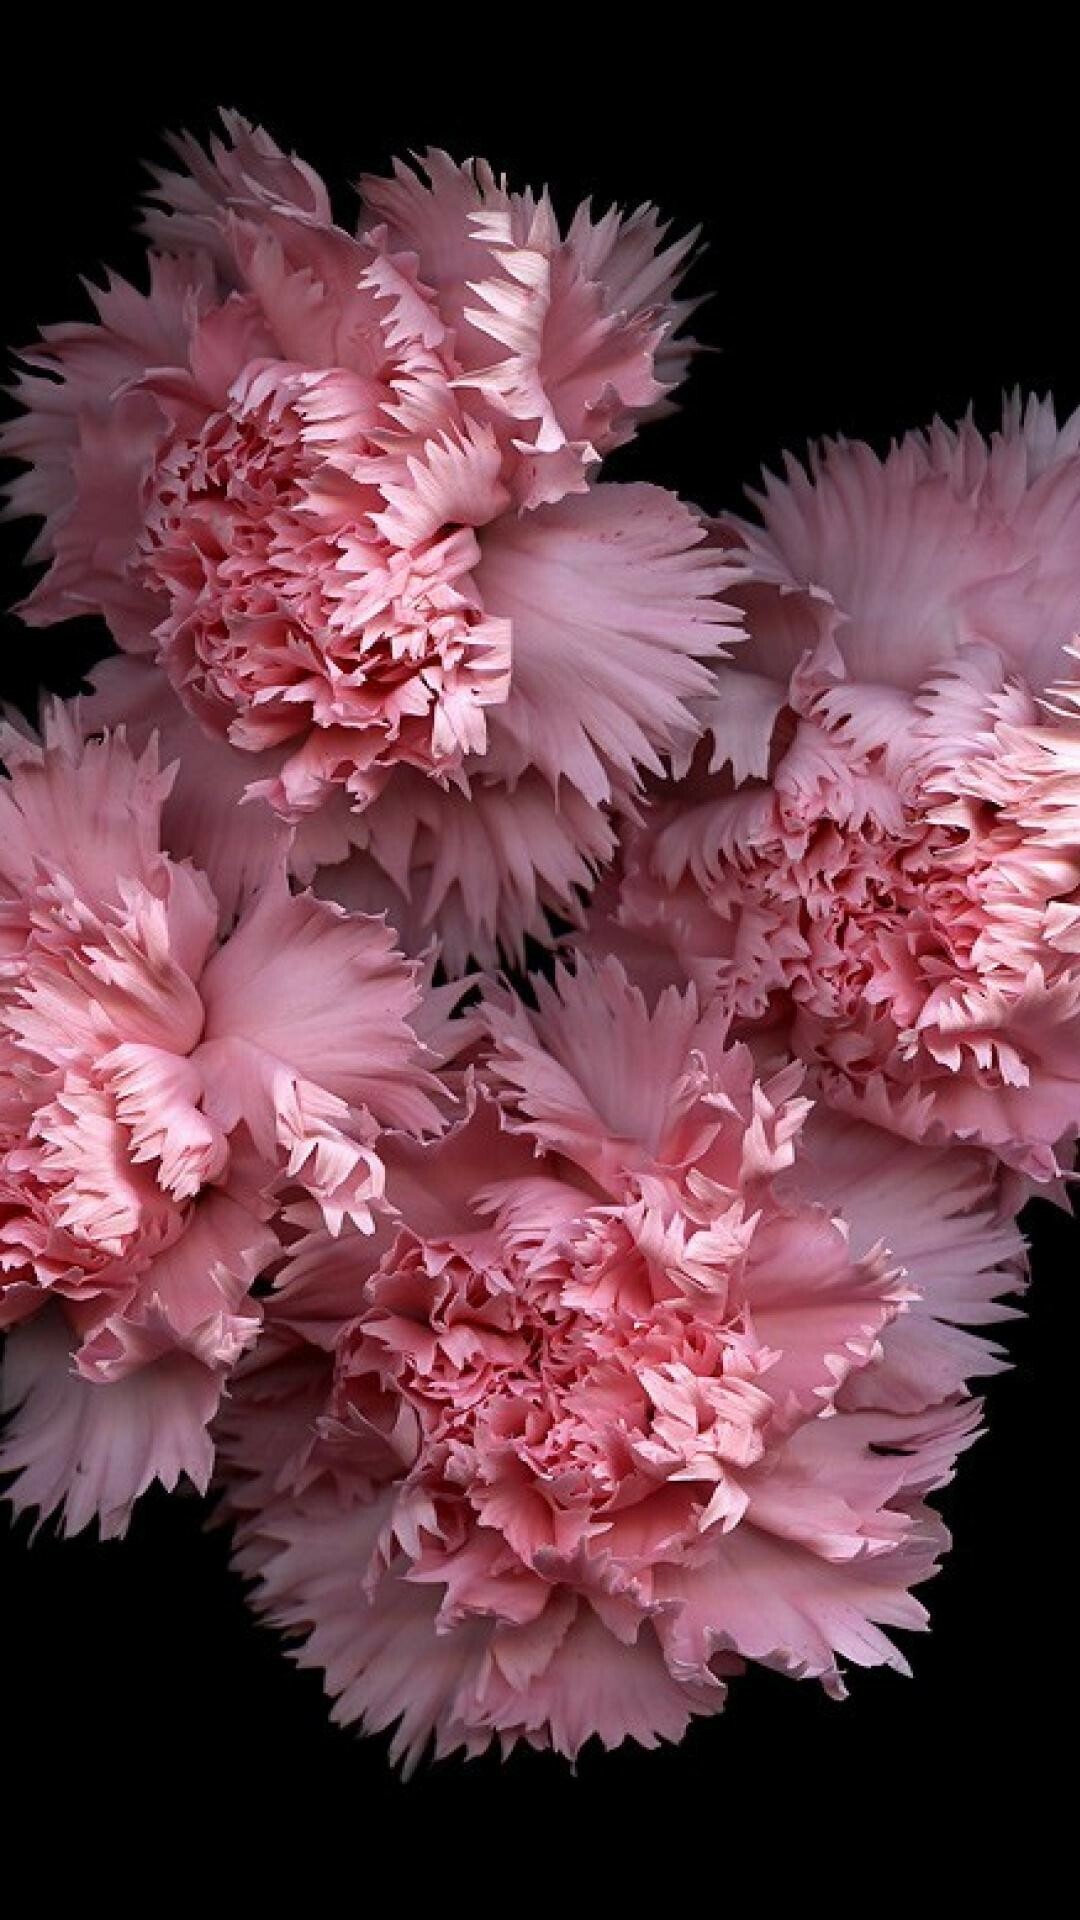 Carnation: A fragrant flower that's commonly reddish-pink but is found in a variety of colors, including white, pale pink, red, and even purple. 1080x1920 Full HD Background.